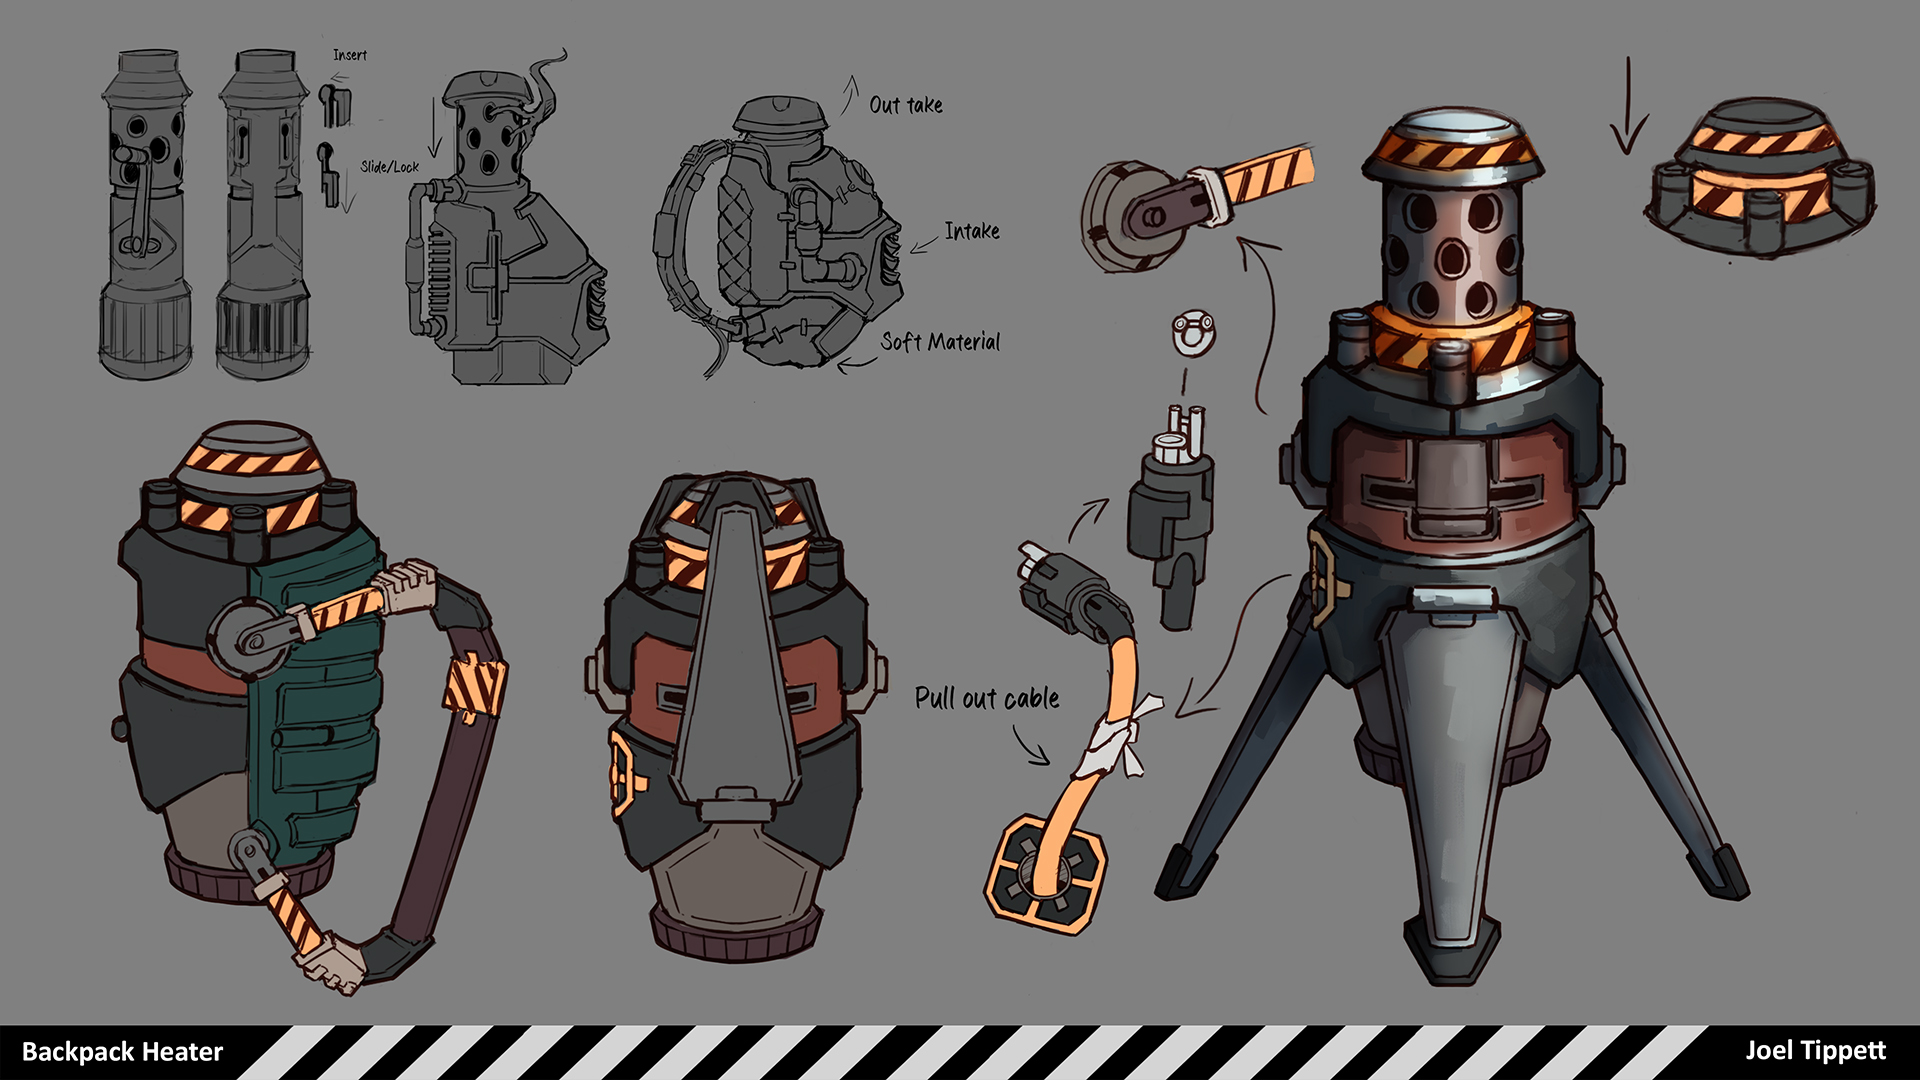 A concept sheet that depicts a backpack heater device with turn around views and breakouts of how it functions.